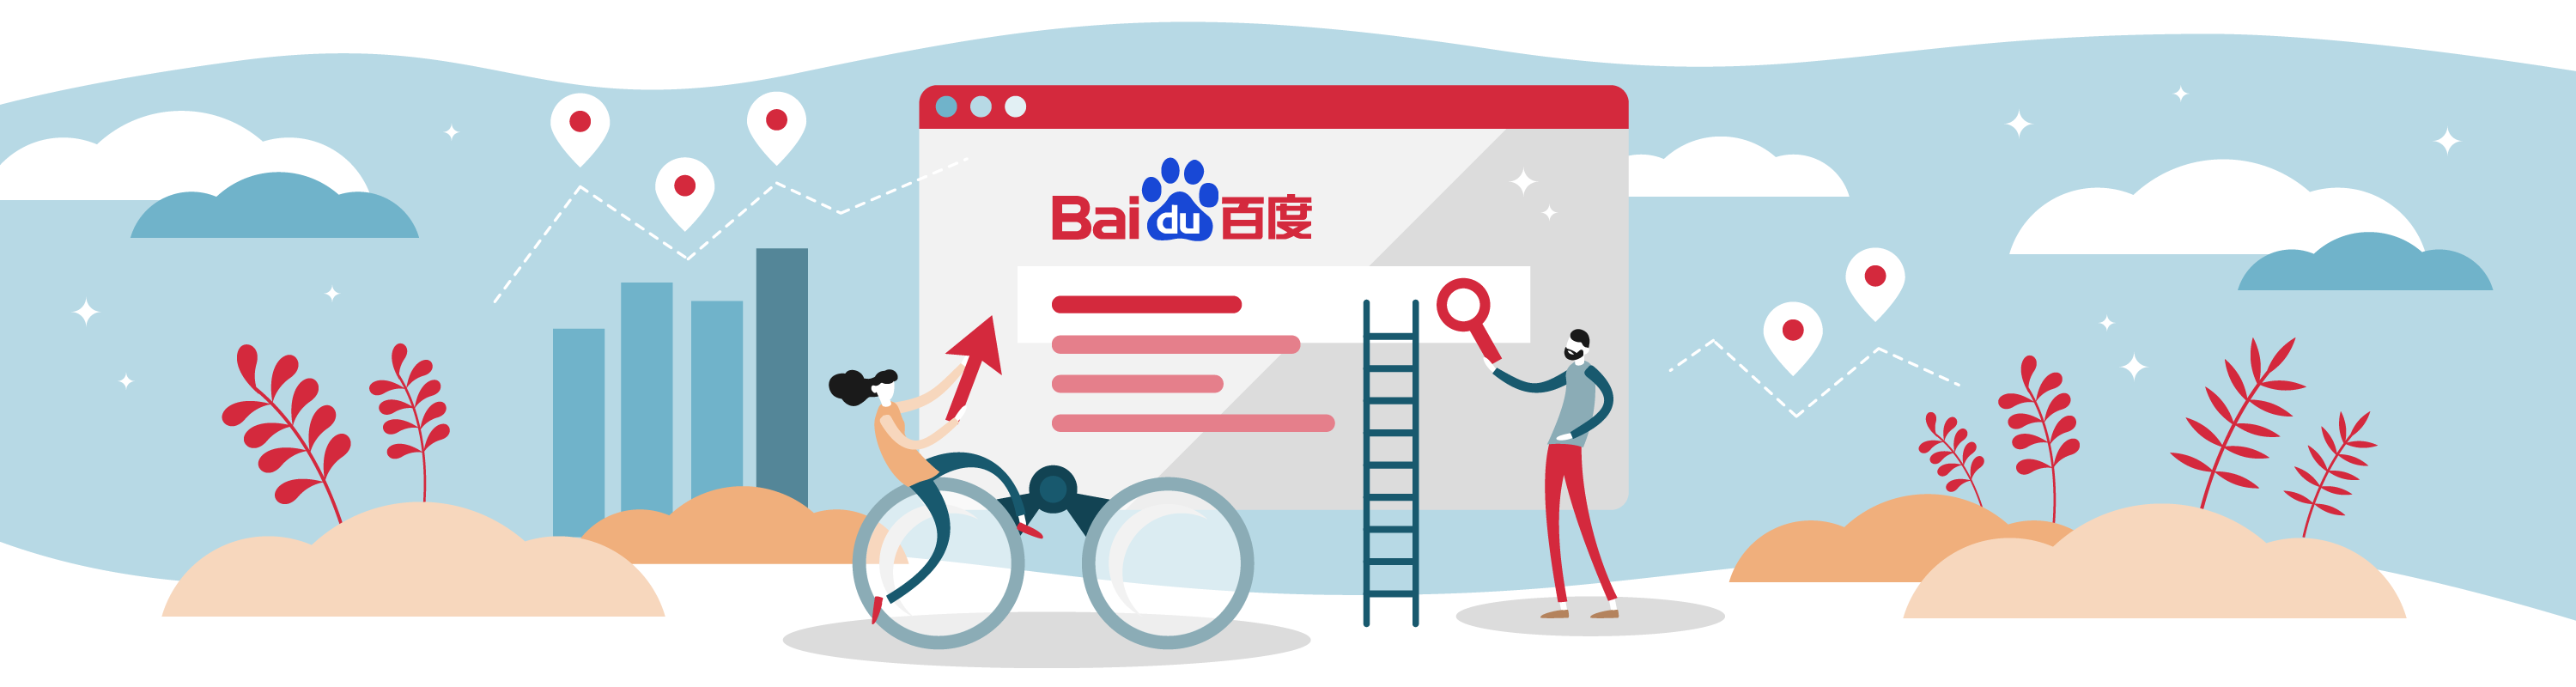 Expand your business via Baidu: Google's number one rival